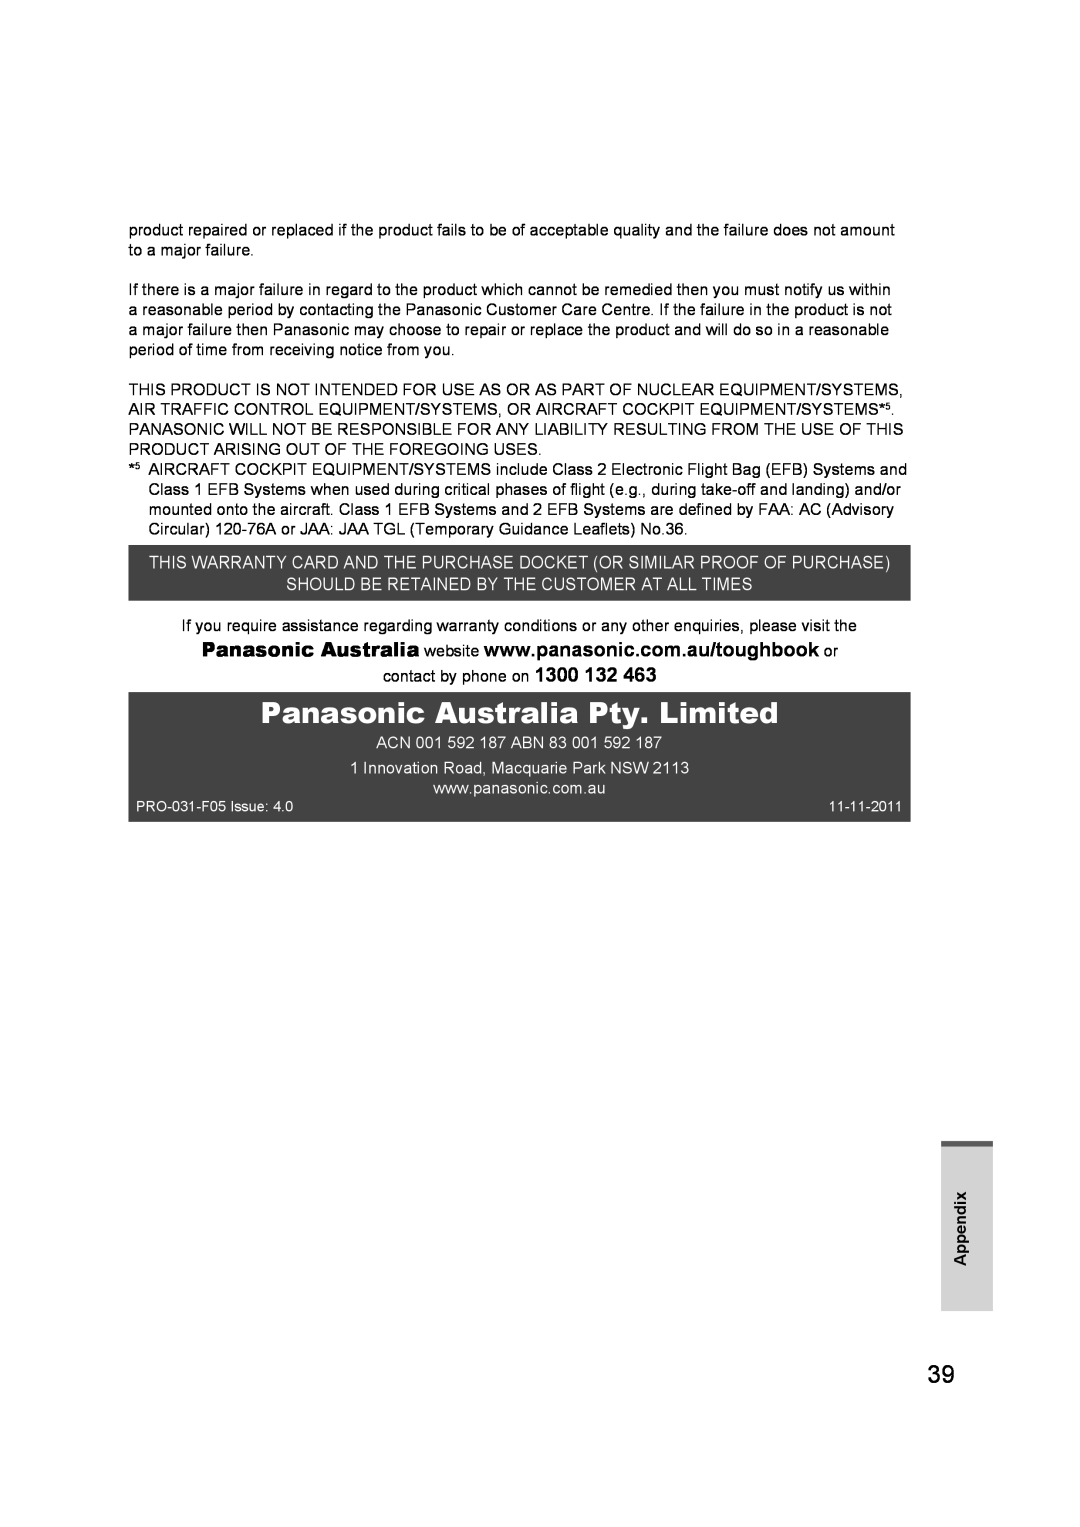 Panasonic FZ-A1 appendix Panasonic Australia Pty. Limited, Should Be Retained By The Customer At All Times 